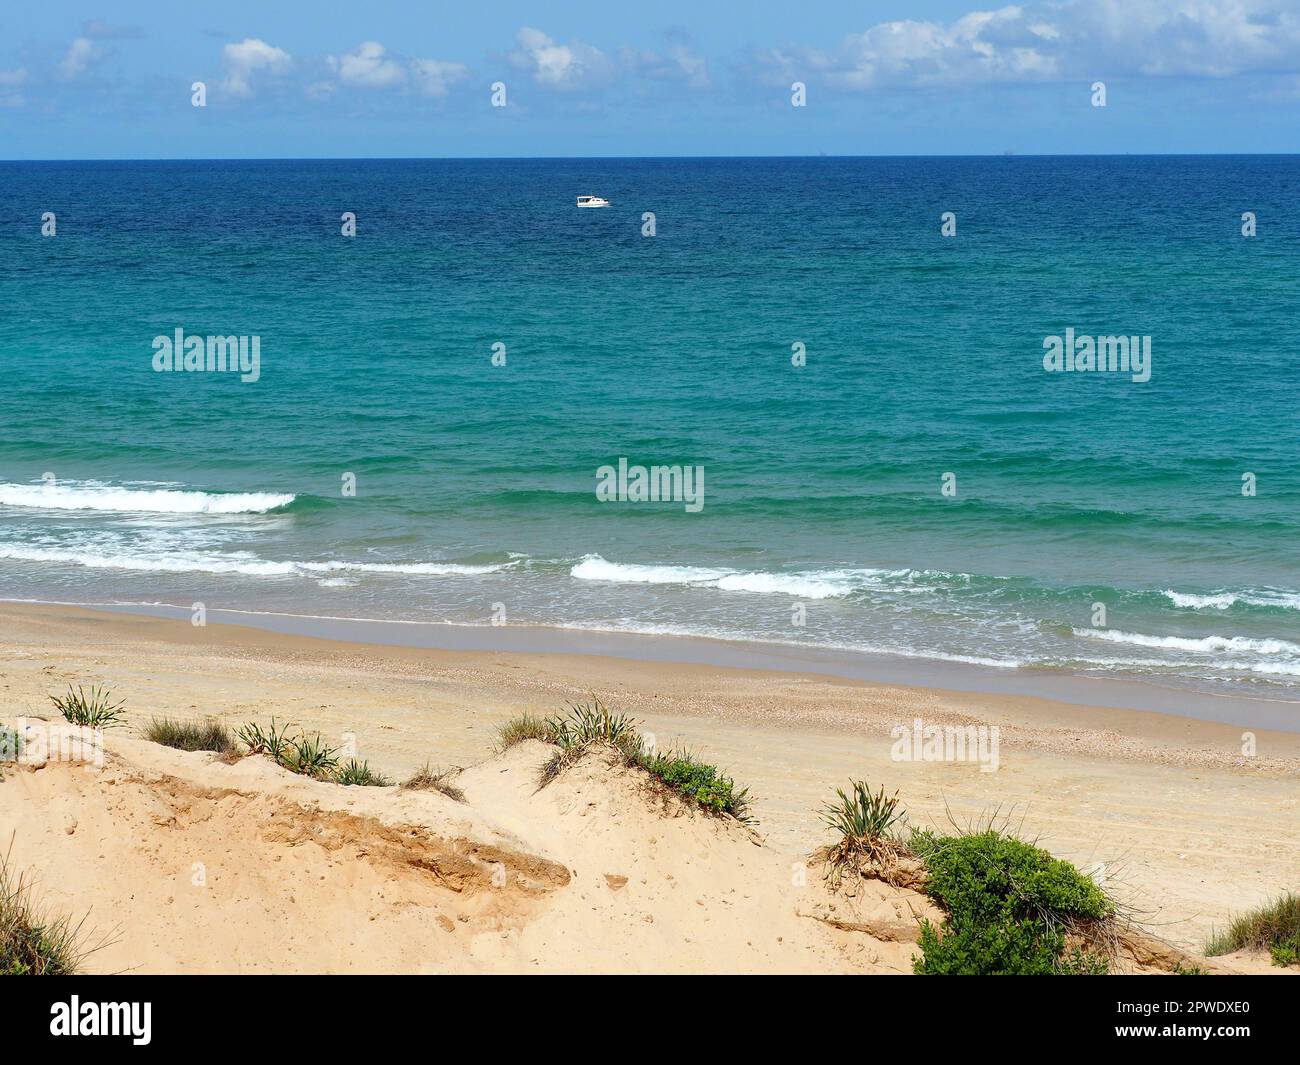 Sandy beach and bright colors of the Mediterranean Sea in Israel. Stock Photo